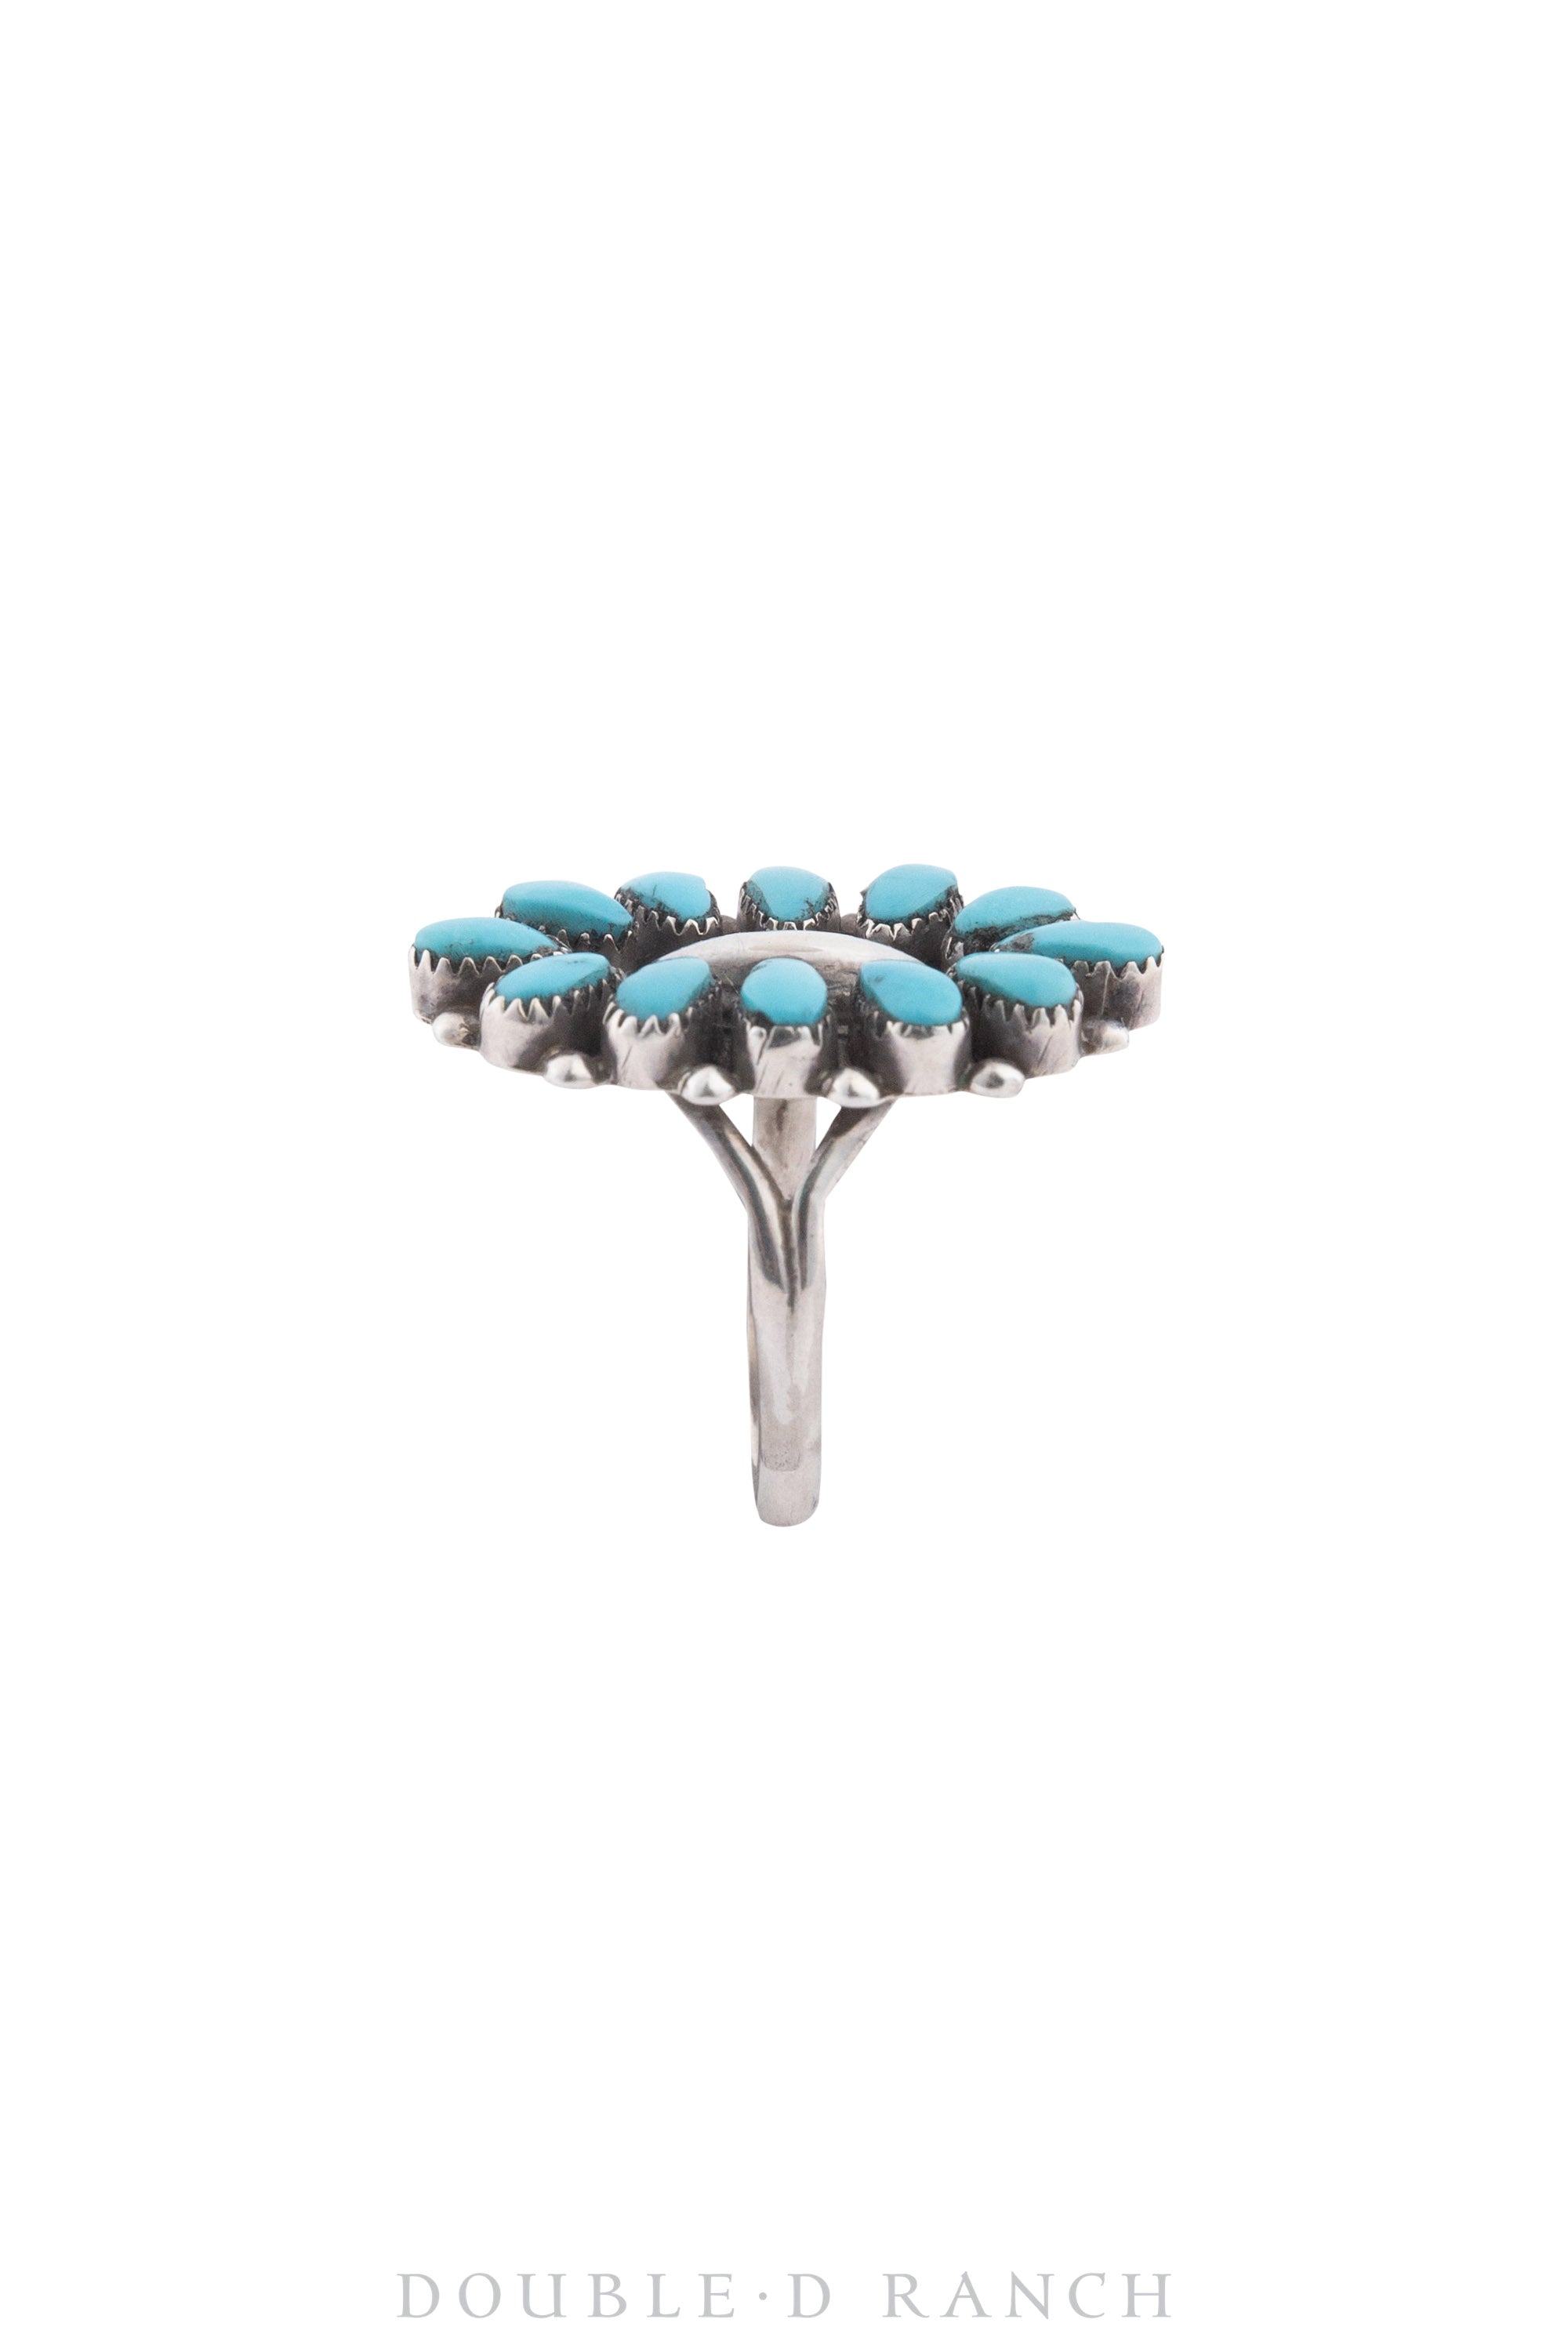 Ring, Cluster, Turquoise, Contemporary, 1326